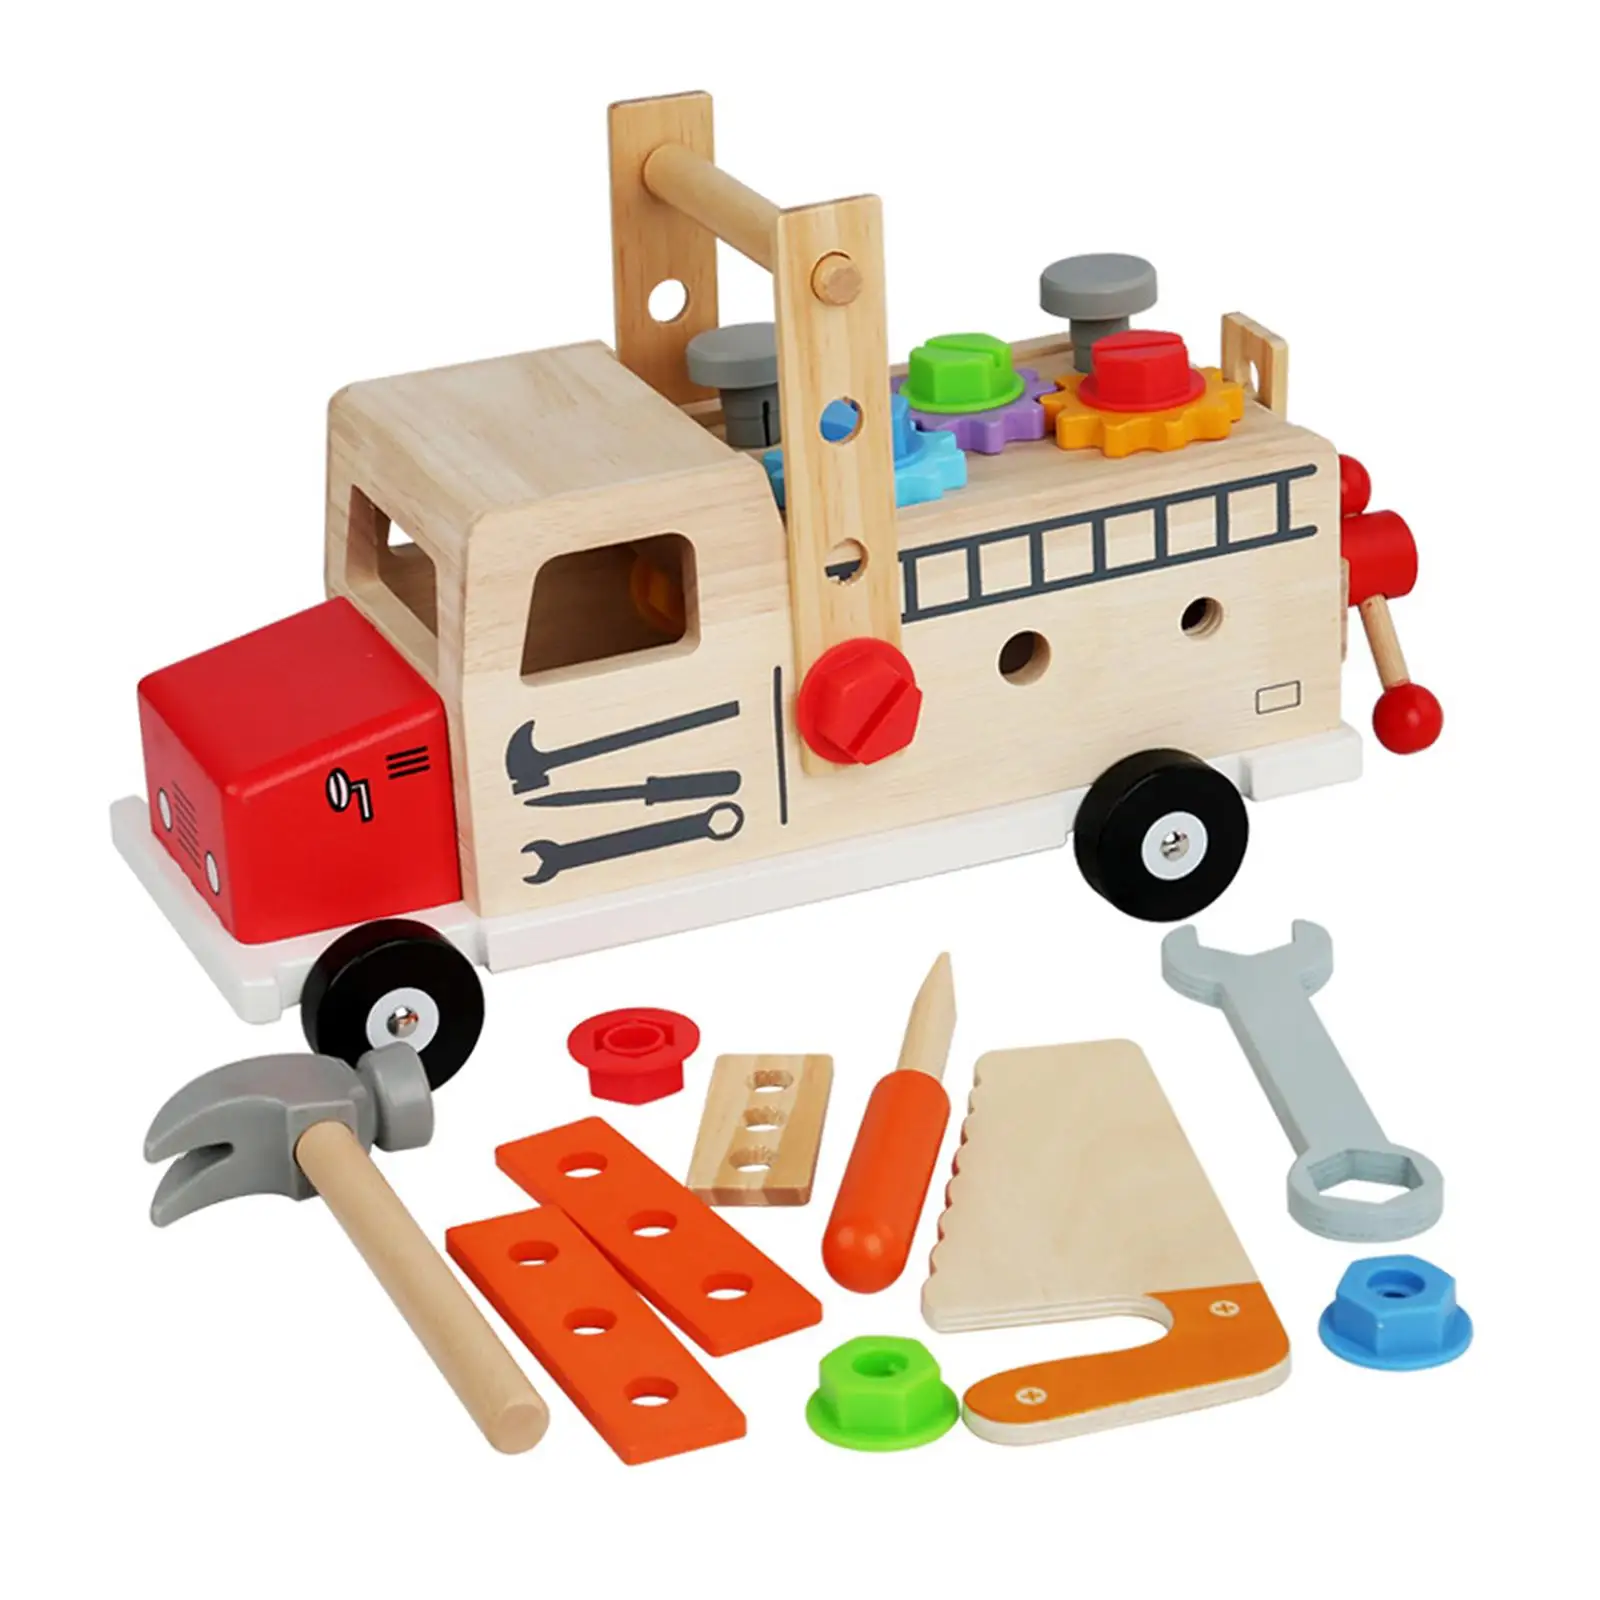 Kids Tool Screwing Assembly Carpenter Toy Construction Toy for Kids Children